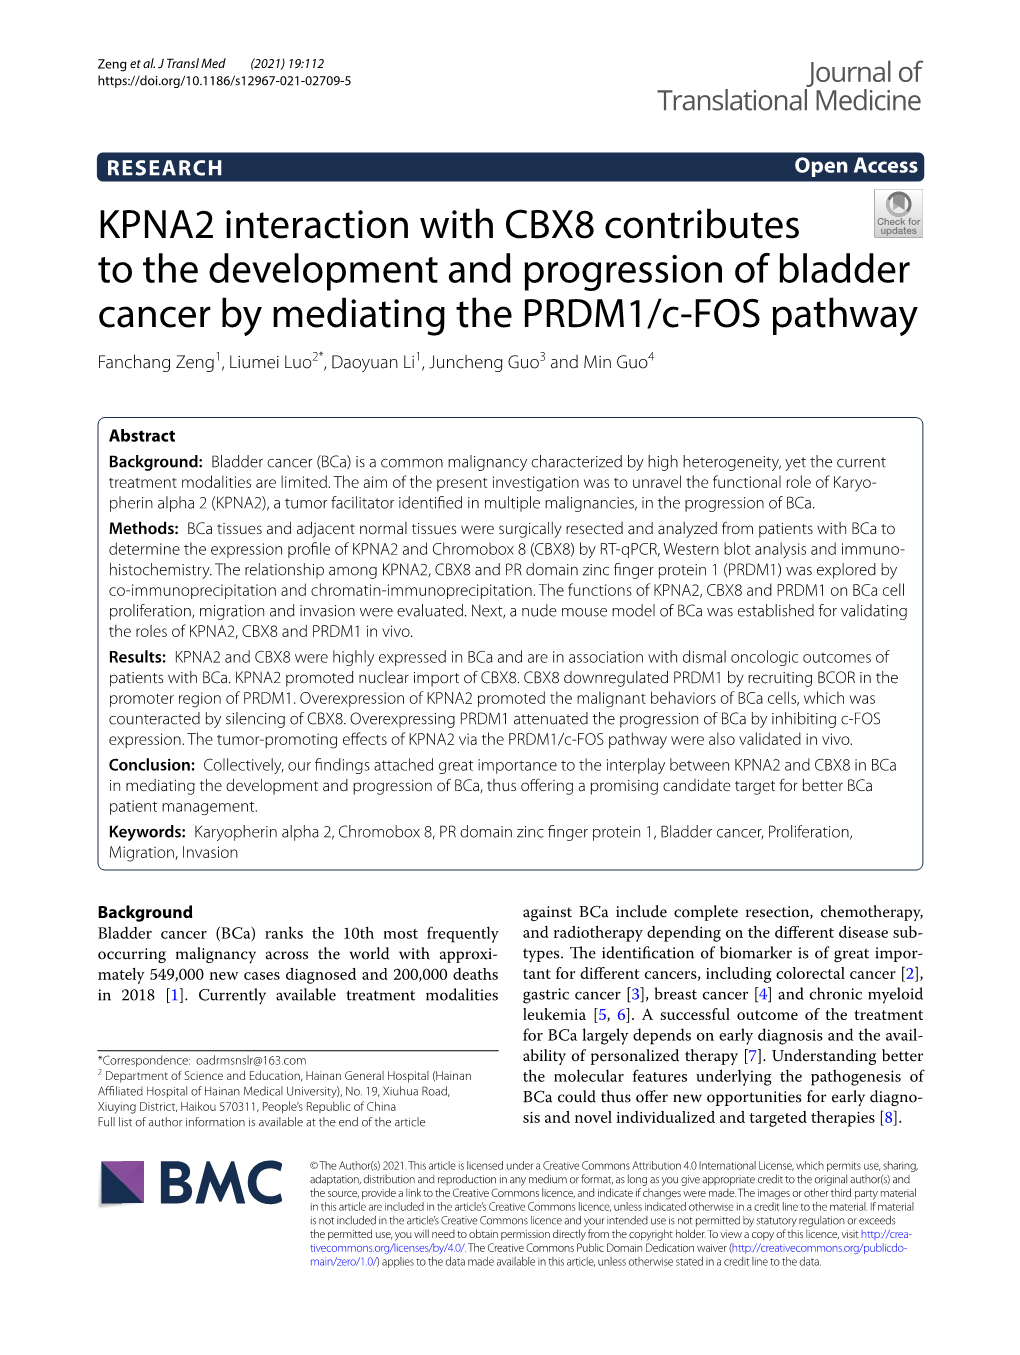 KPNA2 Interaction with CBX8 Contributes to the Development And